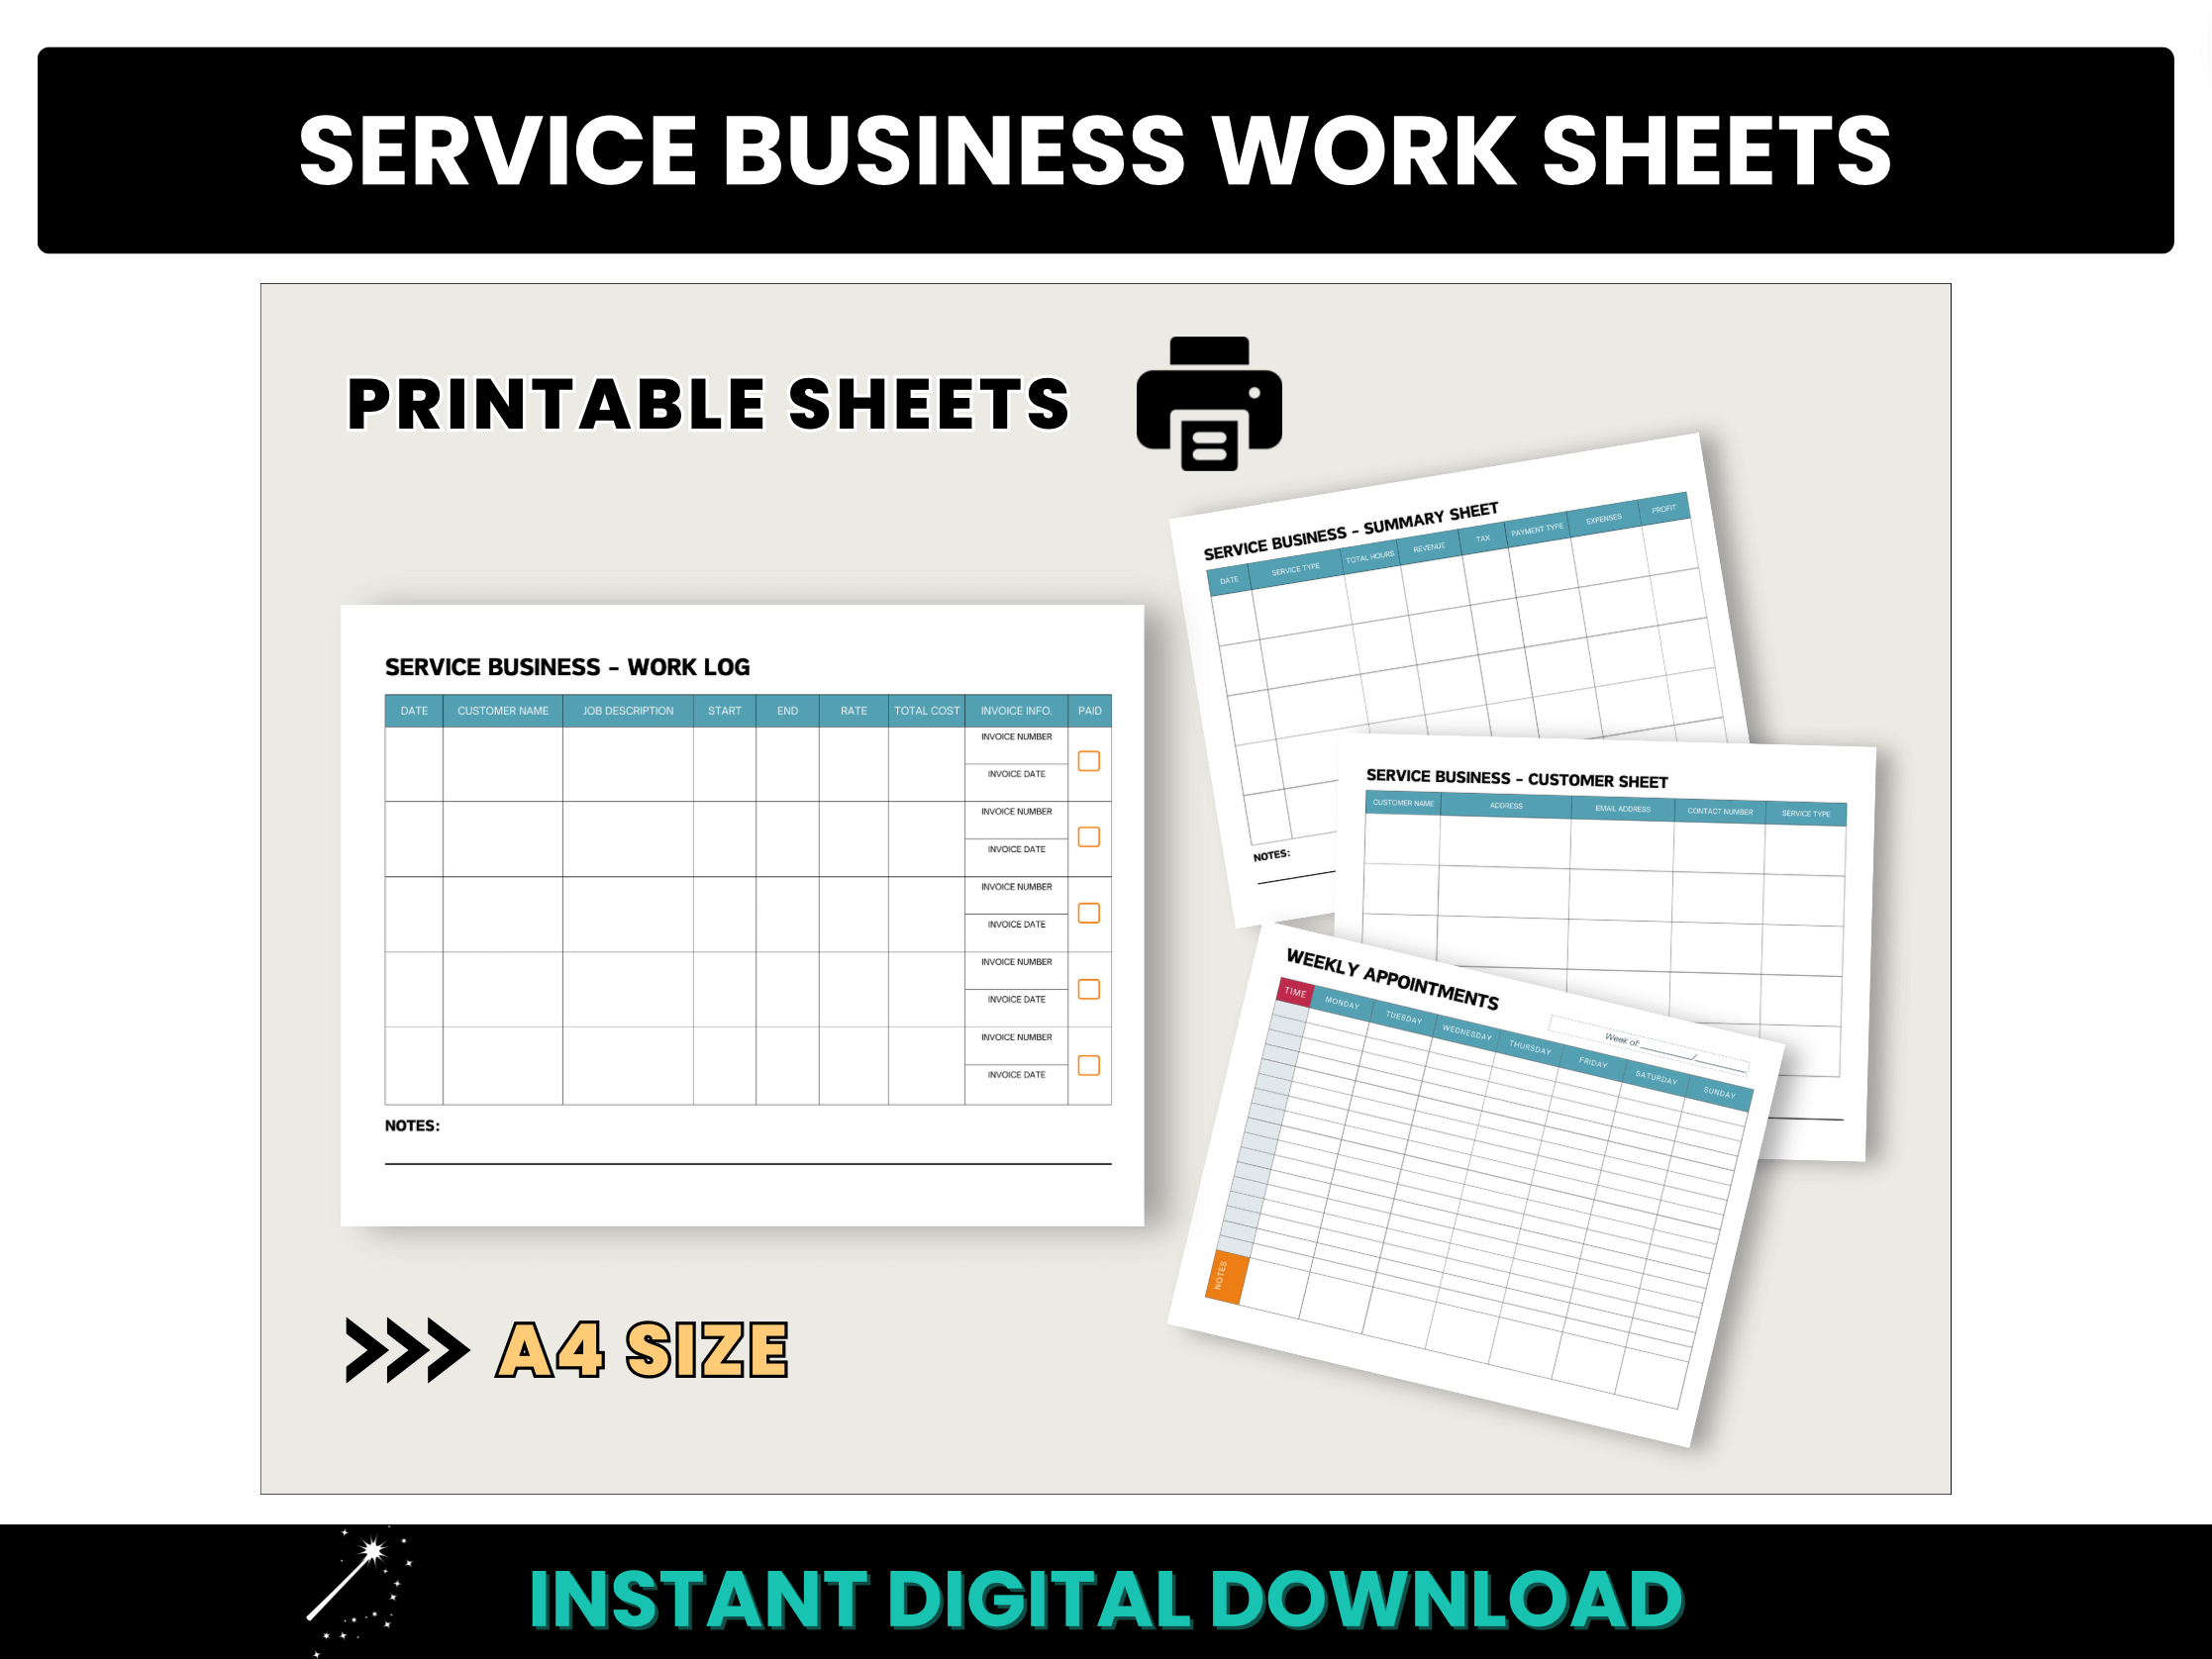 Service Business Work Sheets Printable Template A4 Size